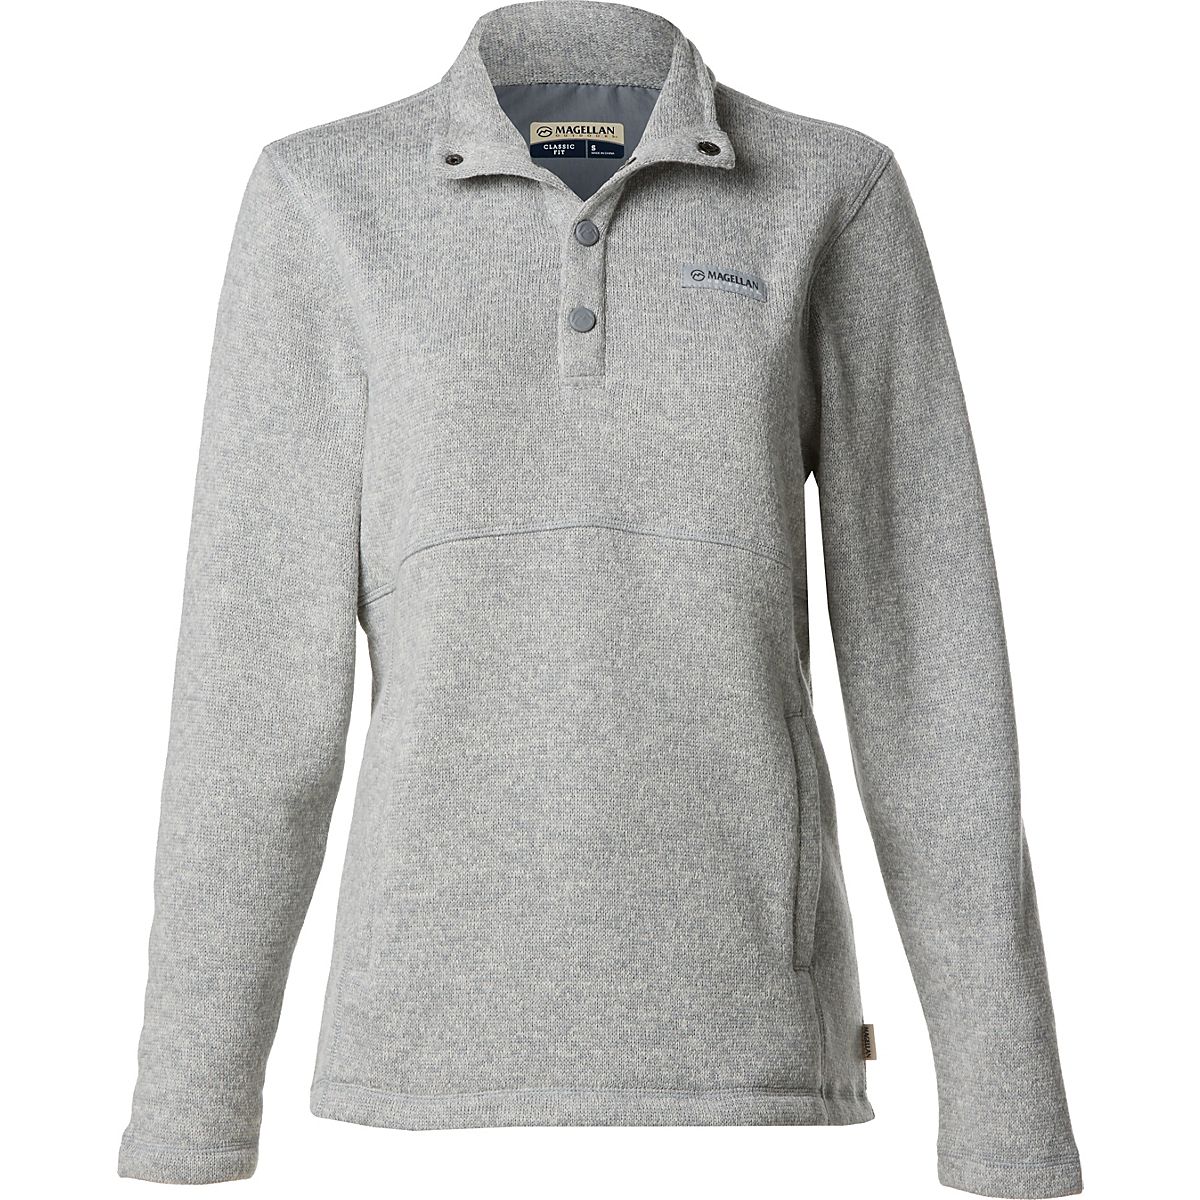 Magellan Outdoors fleece jacket - clothing & accessories - by